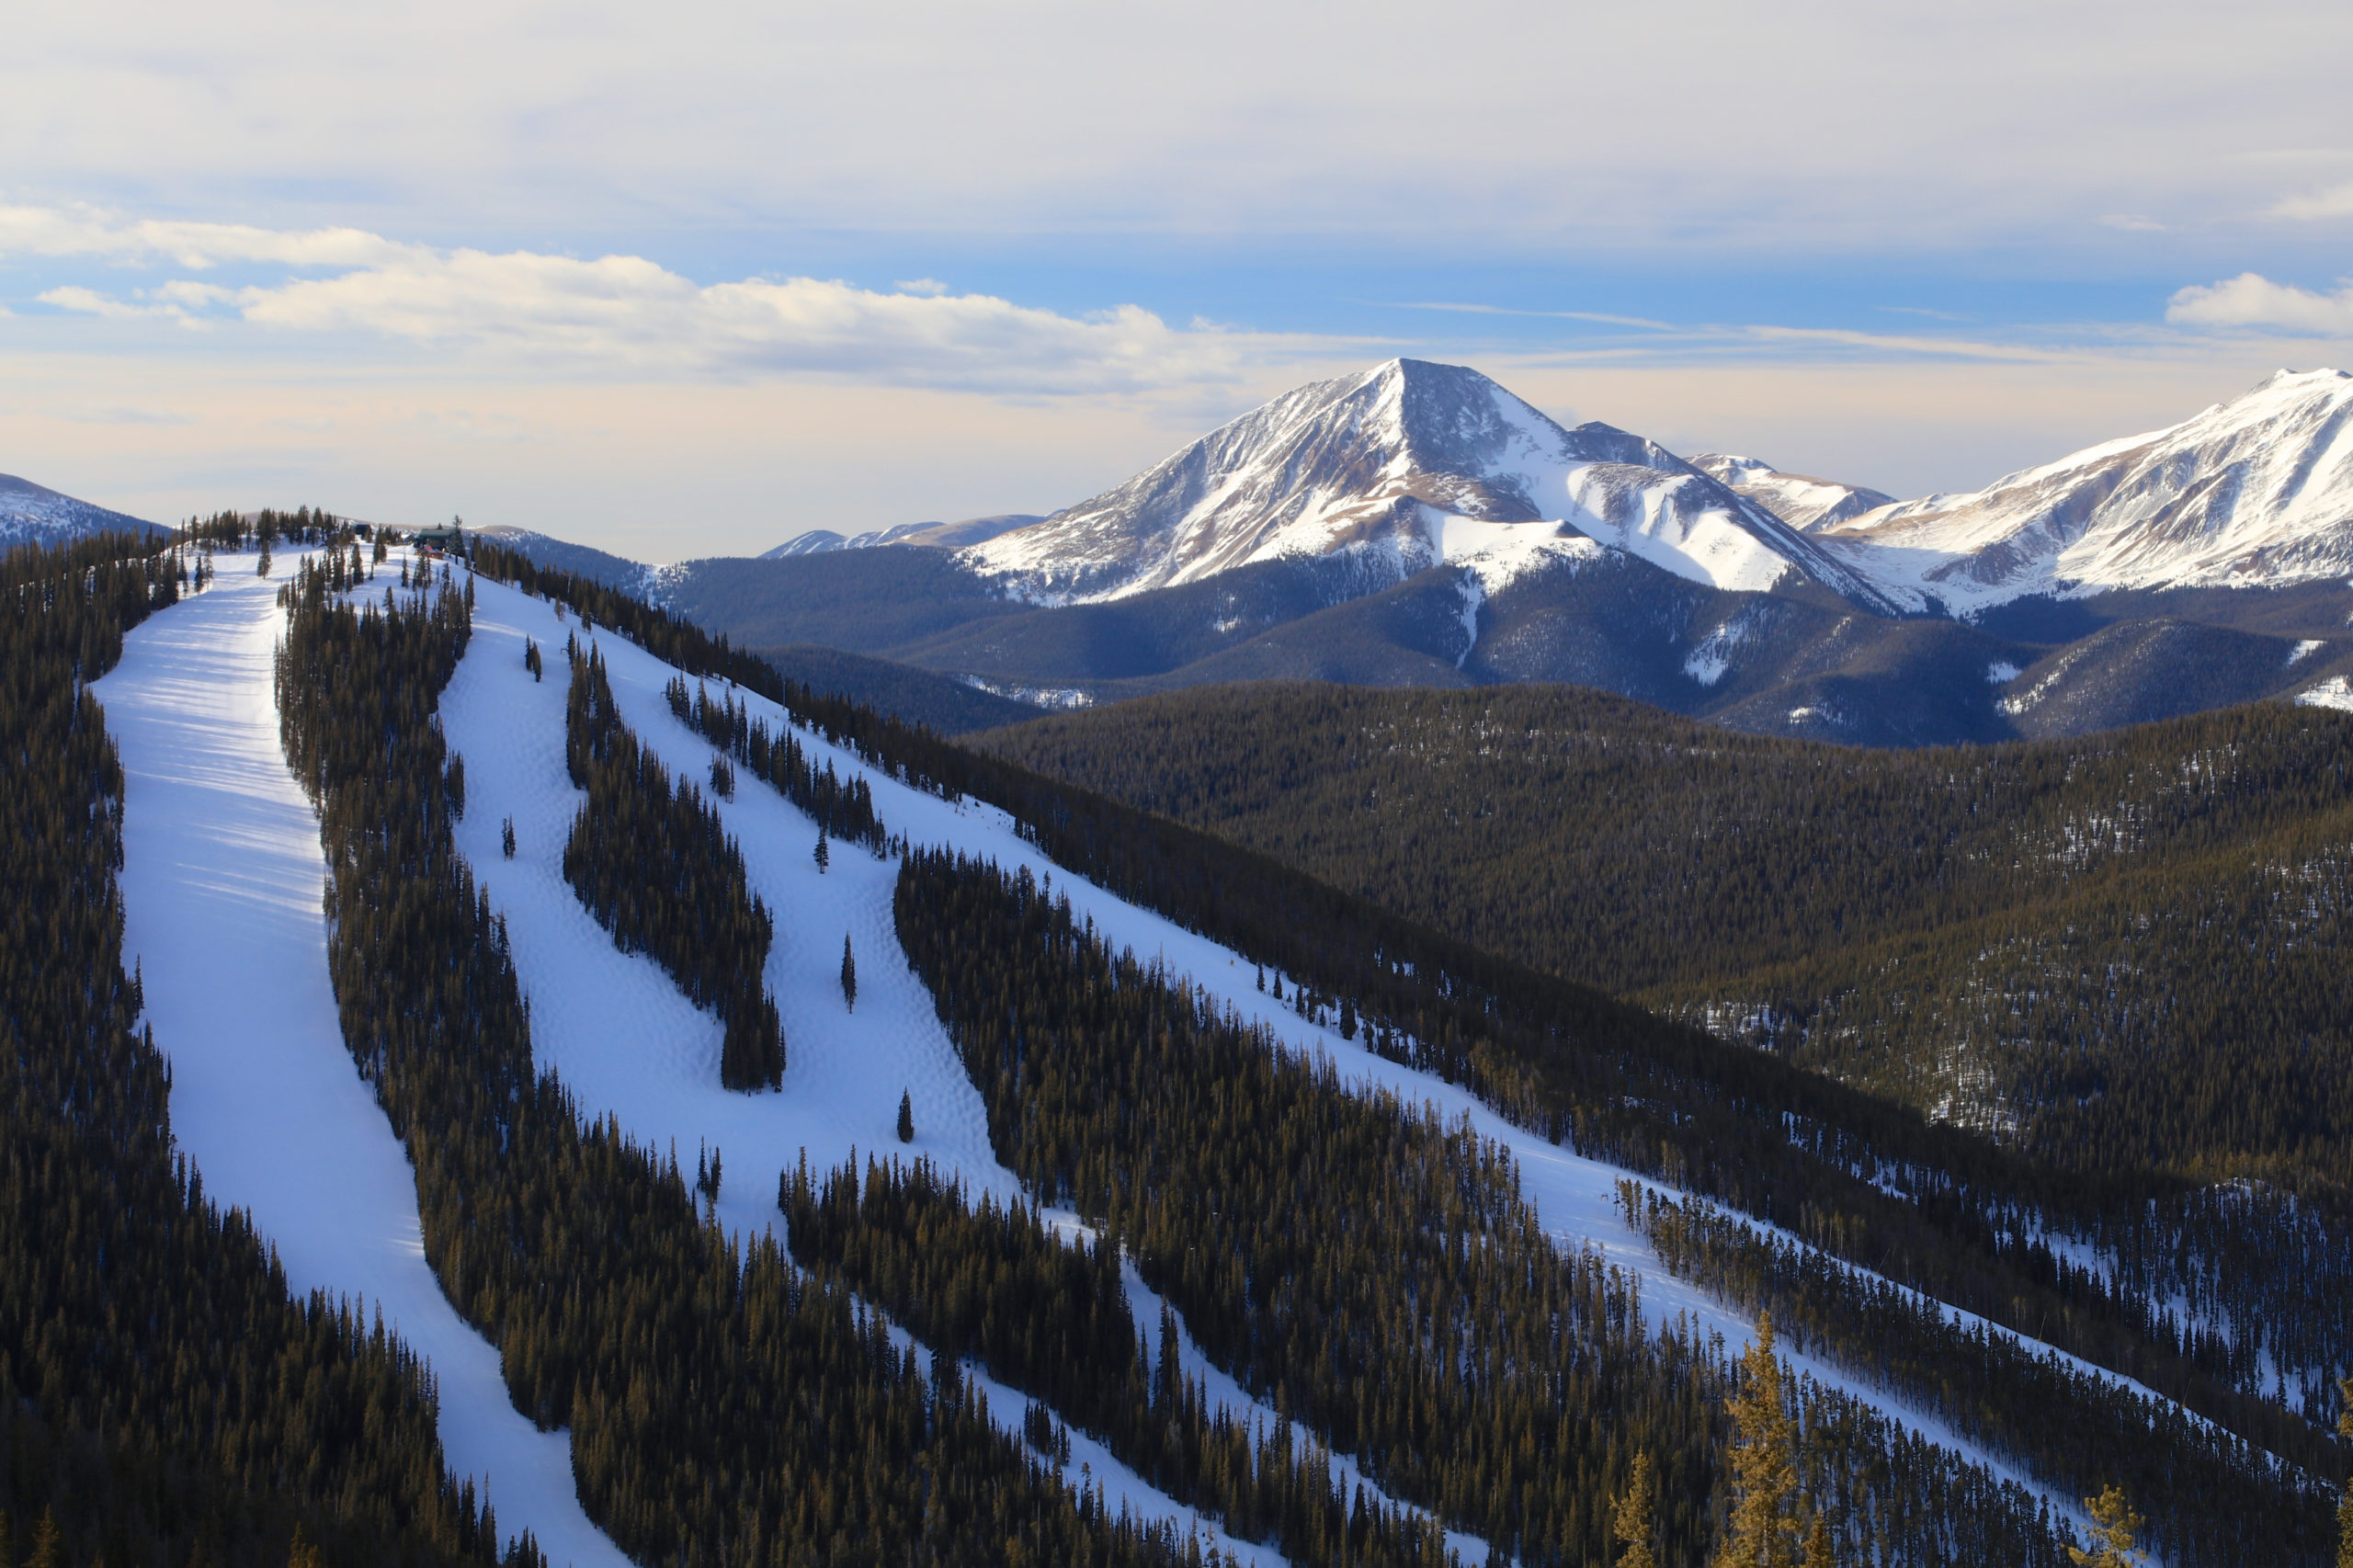 Keystone Colorado Photos, Images and Pictures